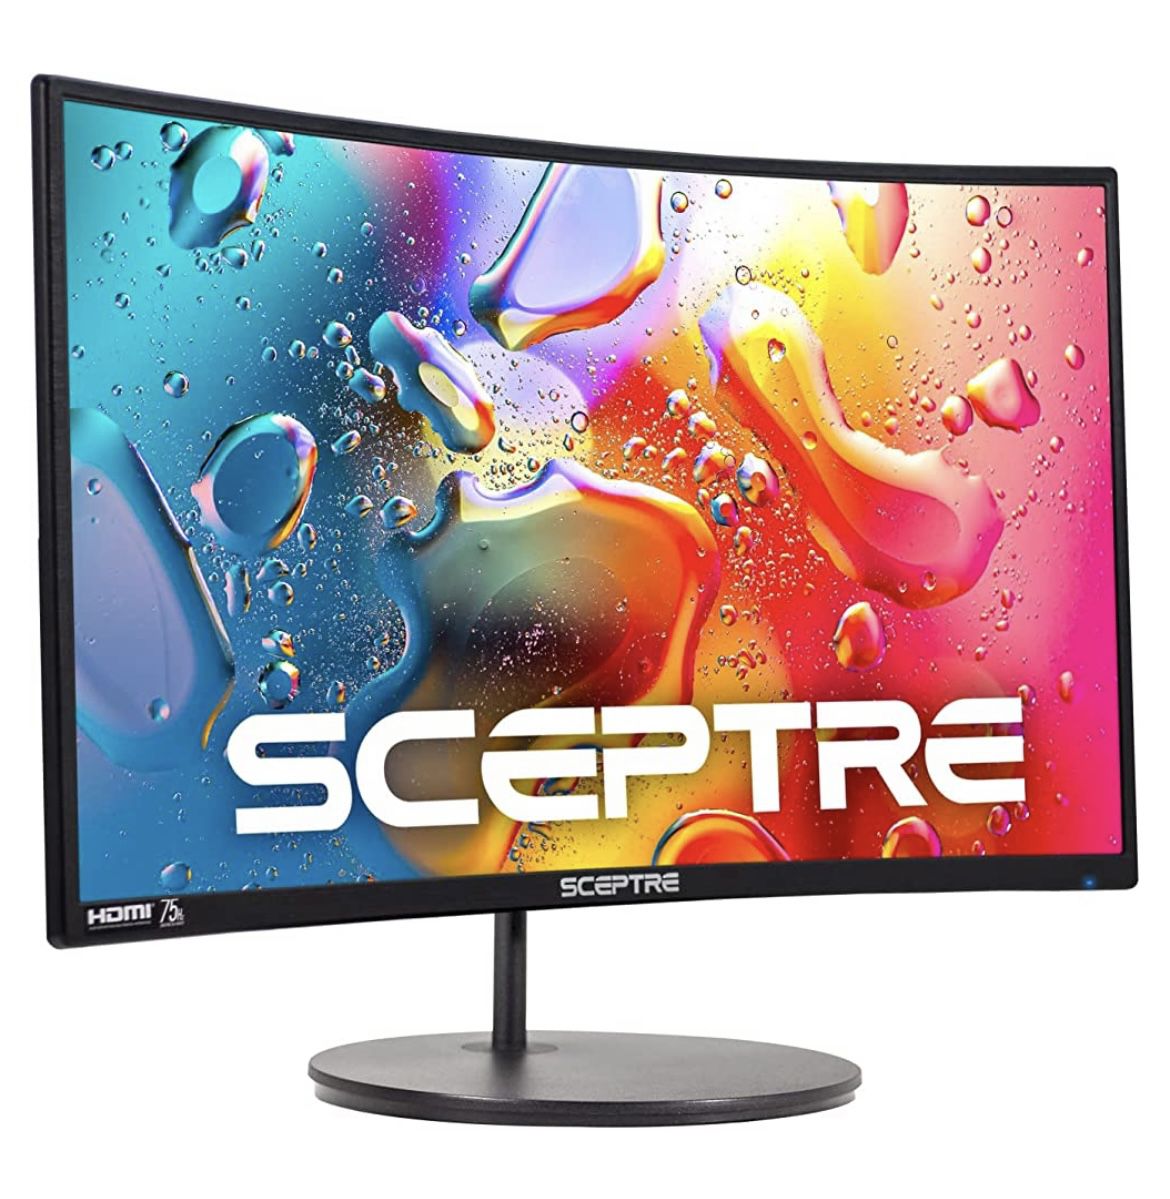 Sceptre 27” Curved Monitor